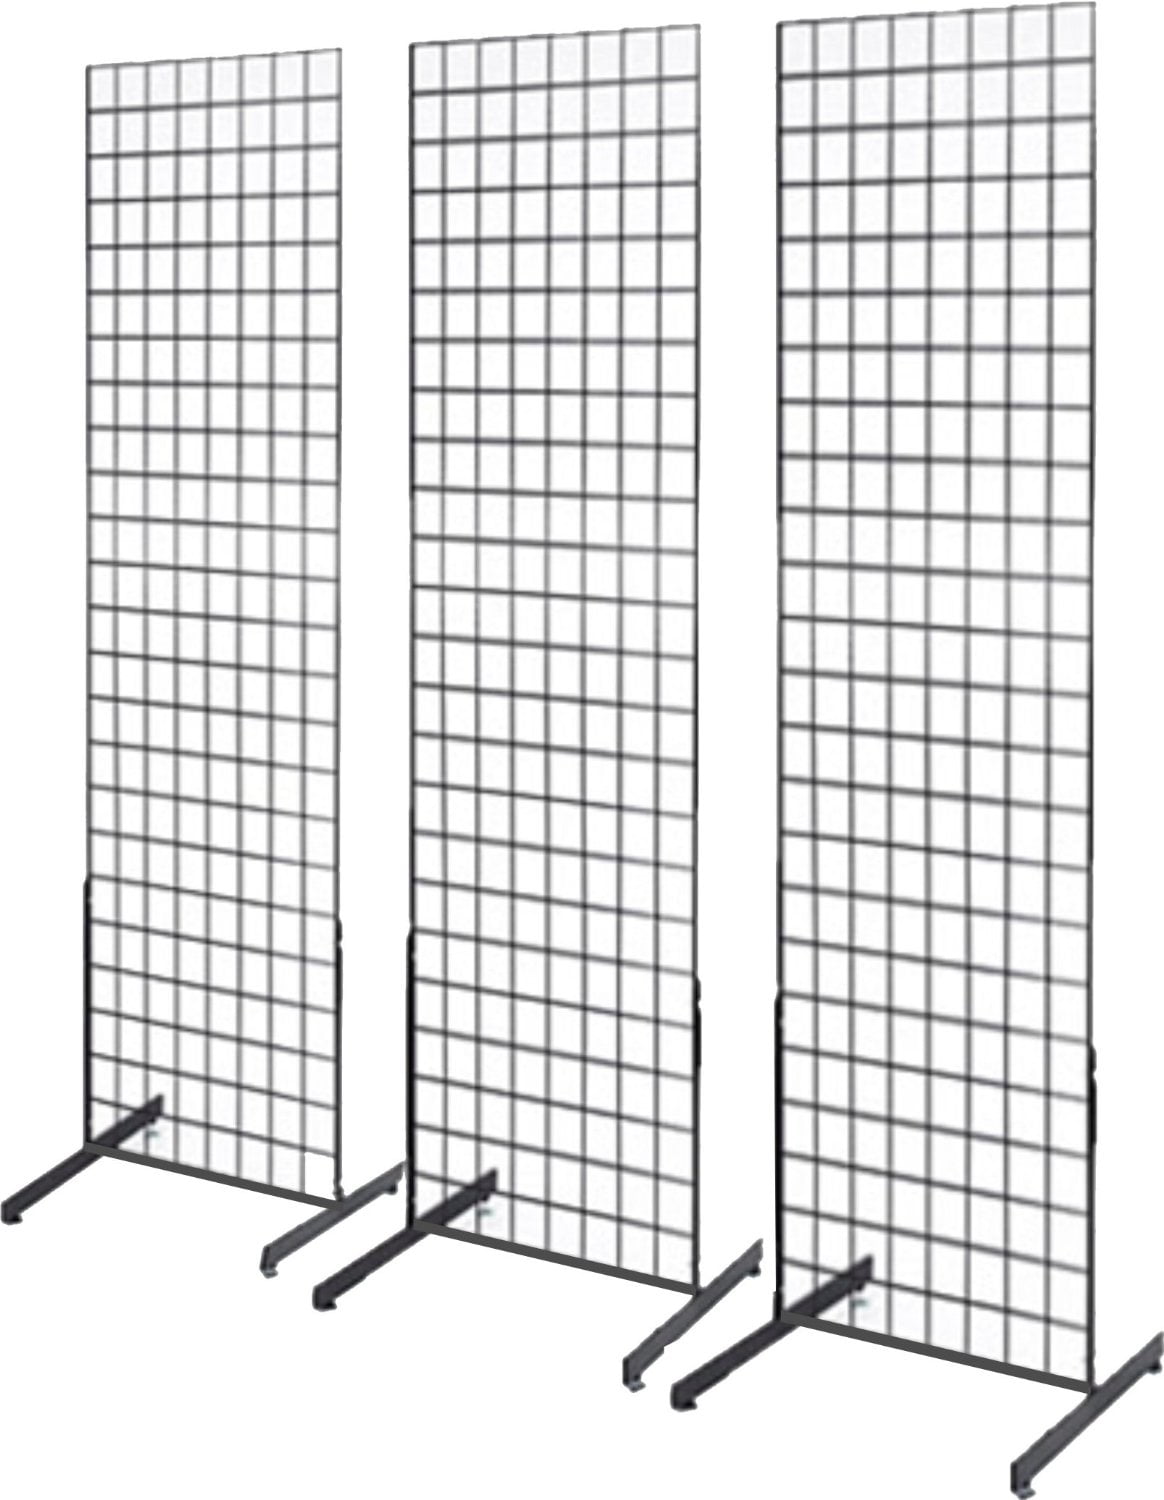 Only Hangers Commercial Grid Panels Pack of 2 2' x 6' Black 